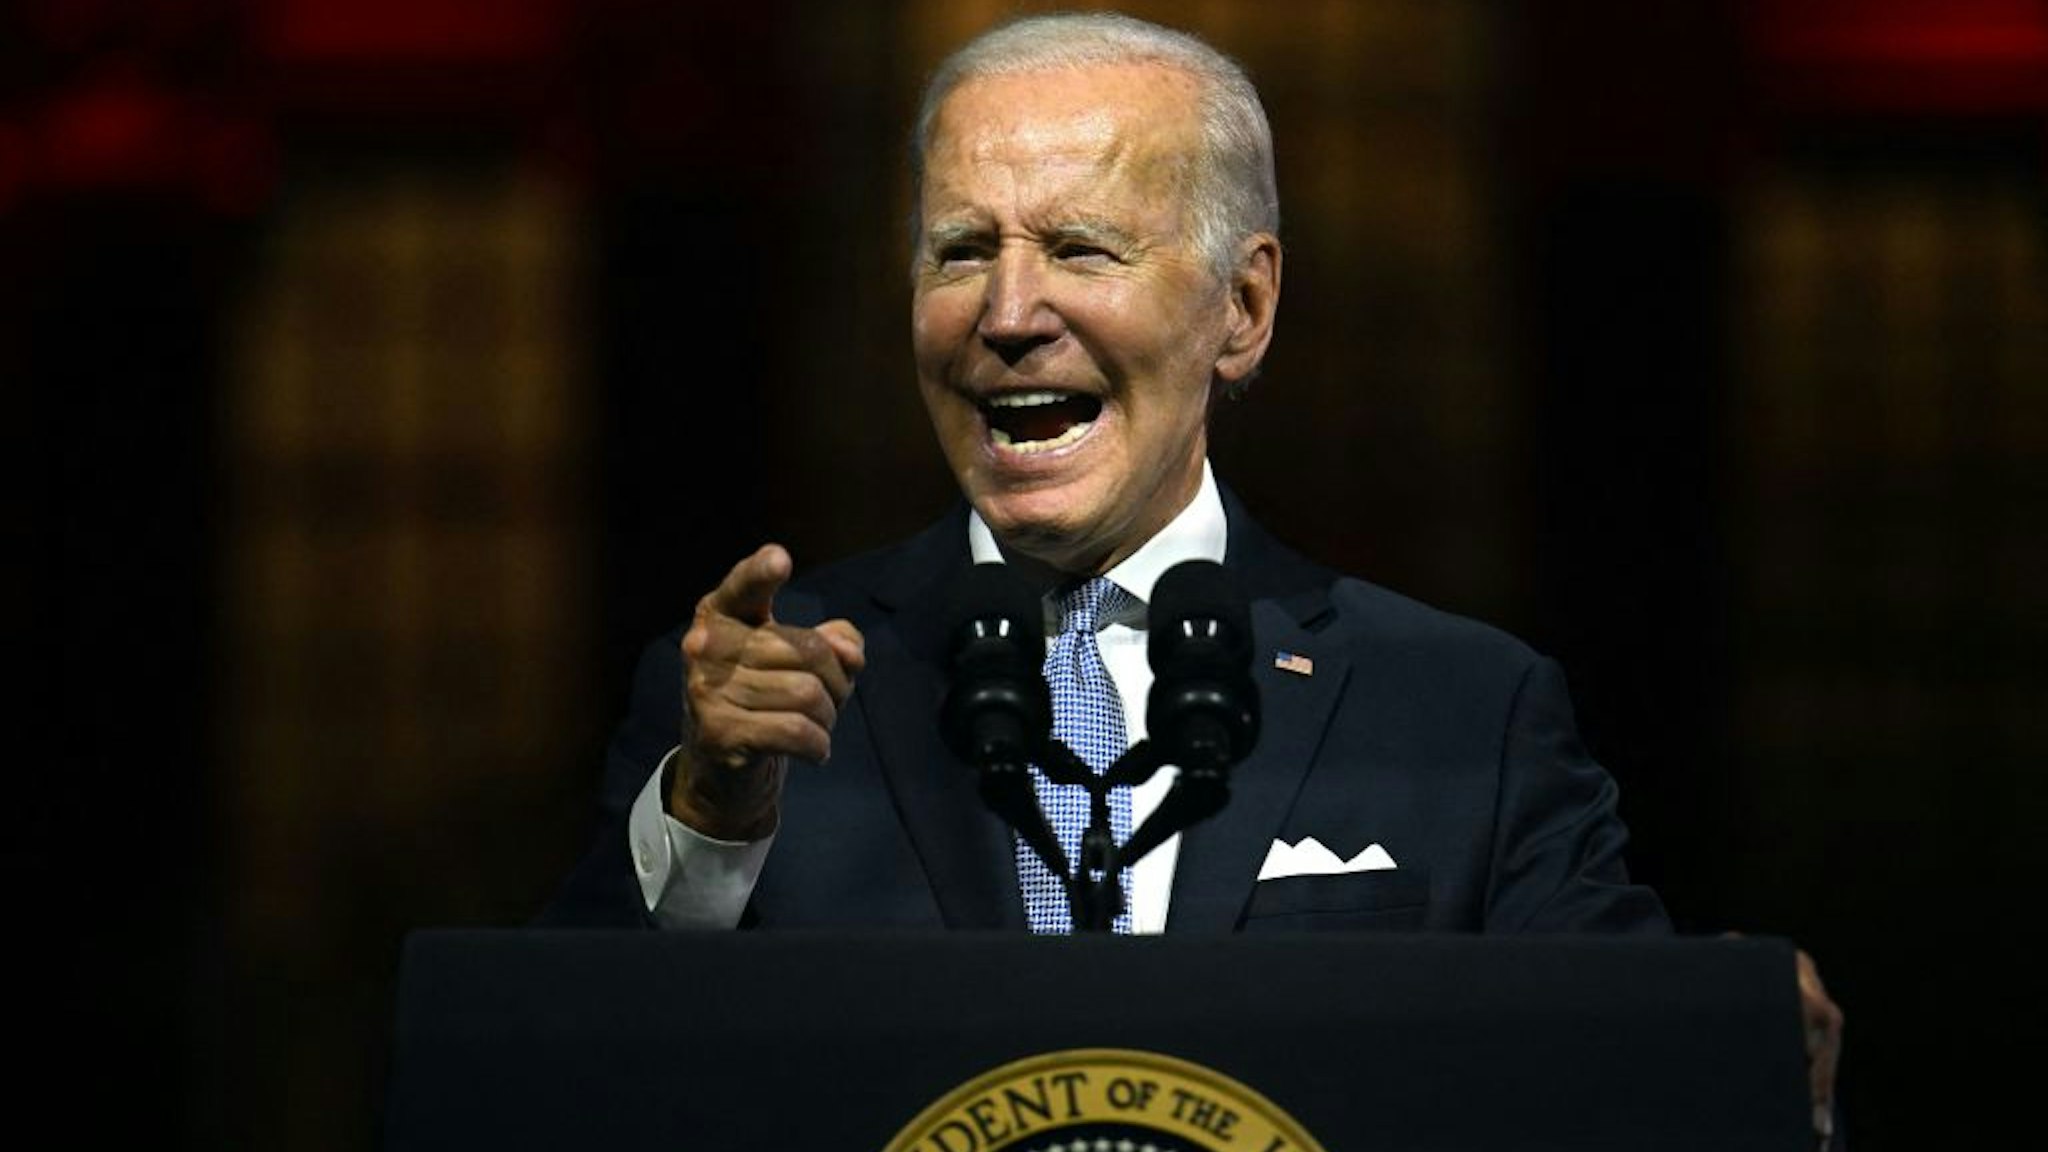 TOPSHOT - US President Joe Biden speaks about the soul of the nation, outside of Independence National Historical Park in Philadelphia, Pennsylvania, on September 1, 2022. (Photo by Jim WATSON / AFP)